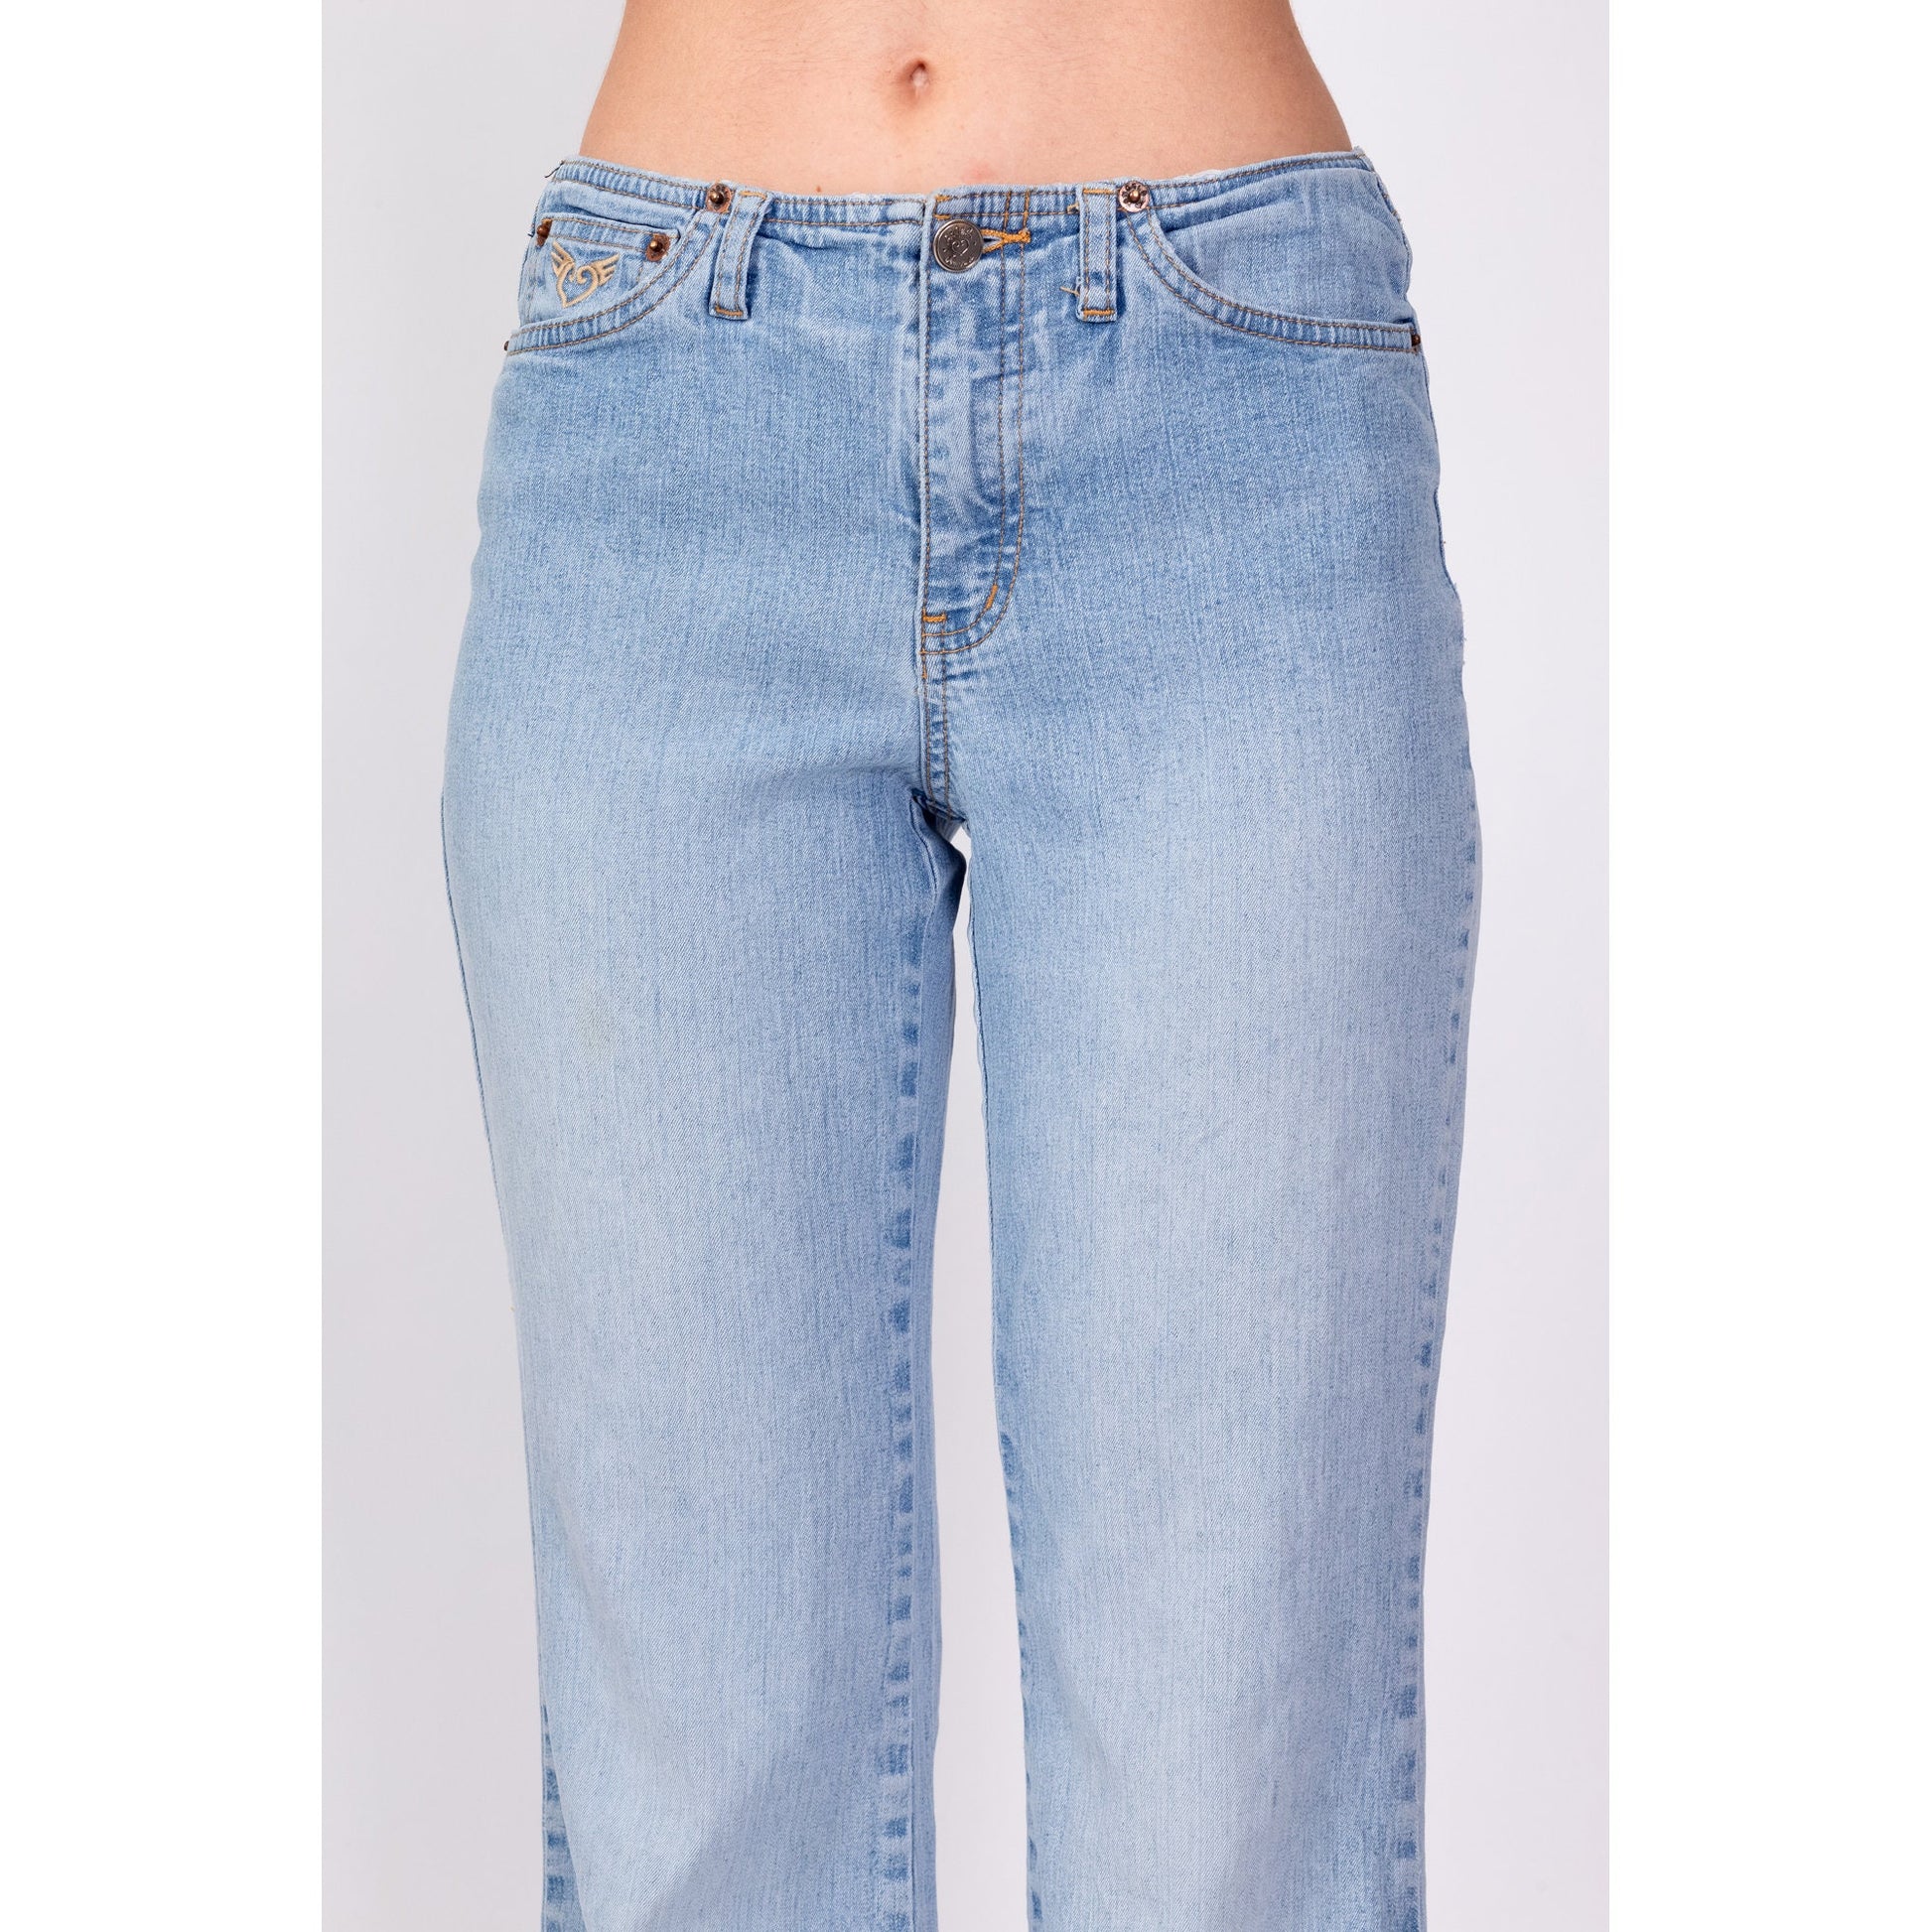 Y2K Low Rise Light Wash Bootcut Jeans - Extra Small 